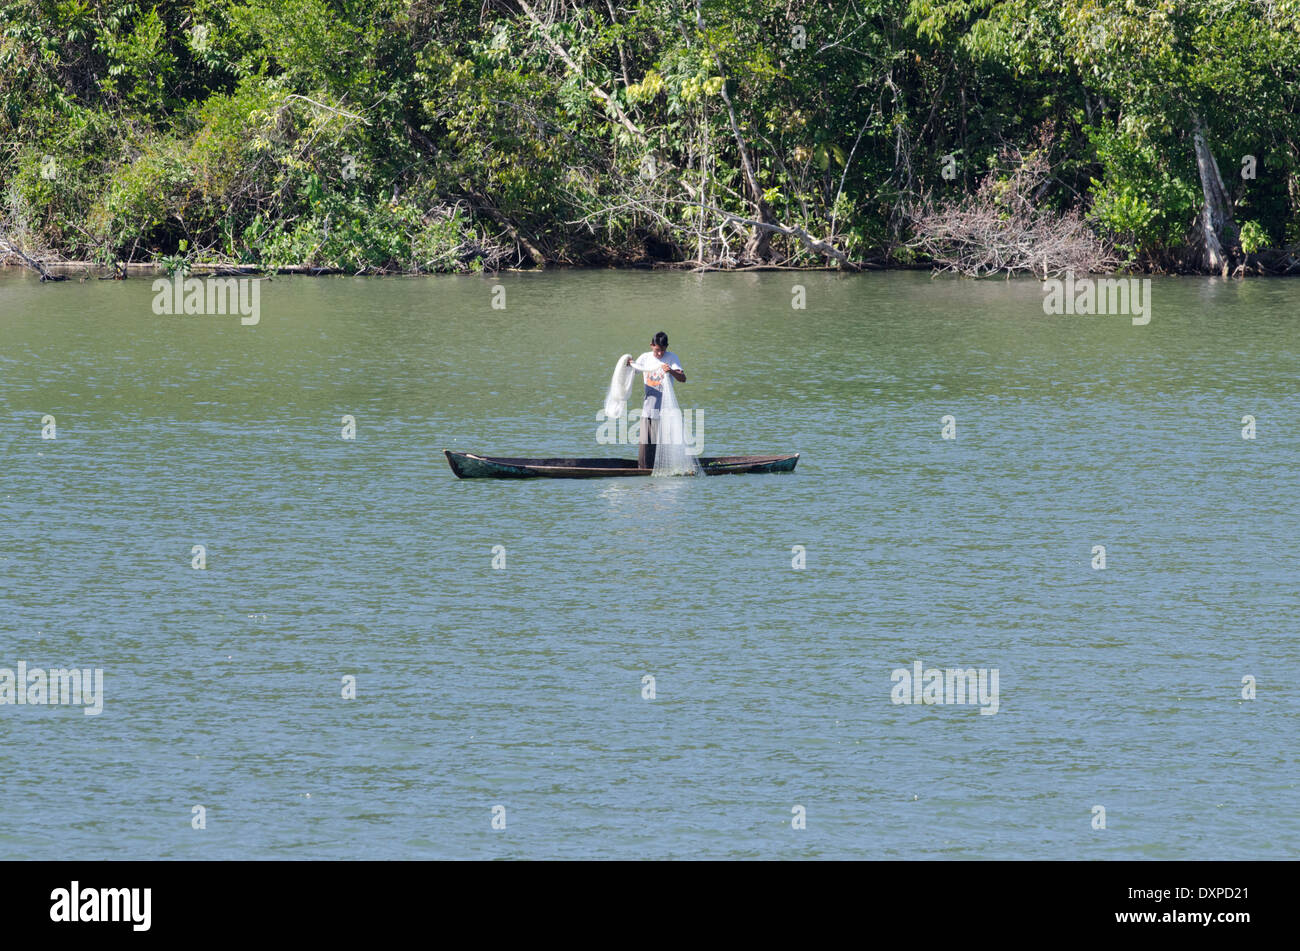 Guatemala, Department of Izabal, Rio Dulce (Sweet Water River) near Livingston. Traditional fishermen in wooden boat with net. Stock Photo